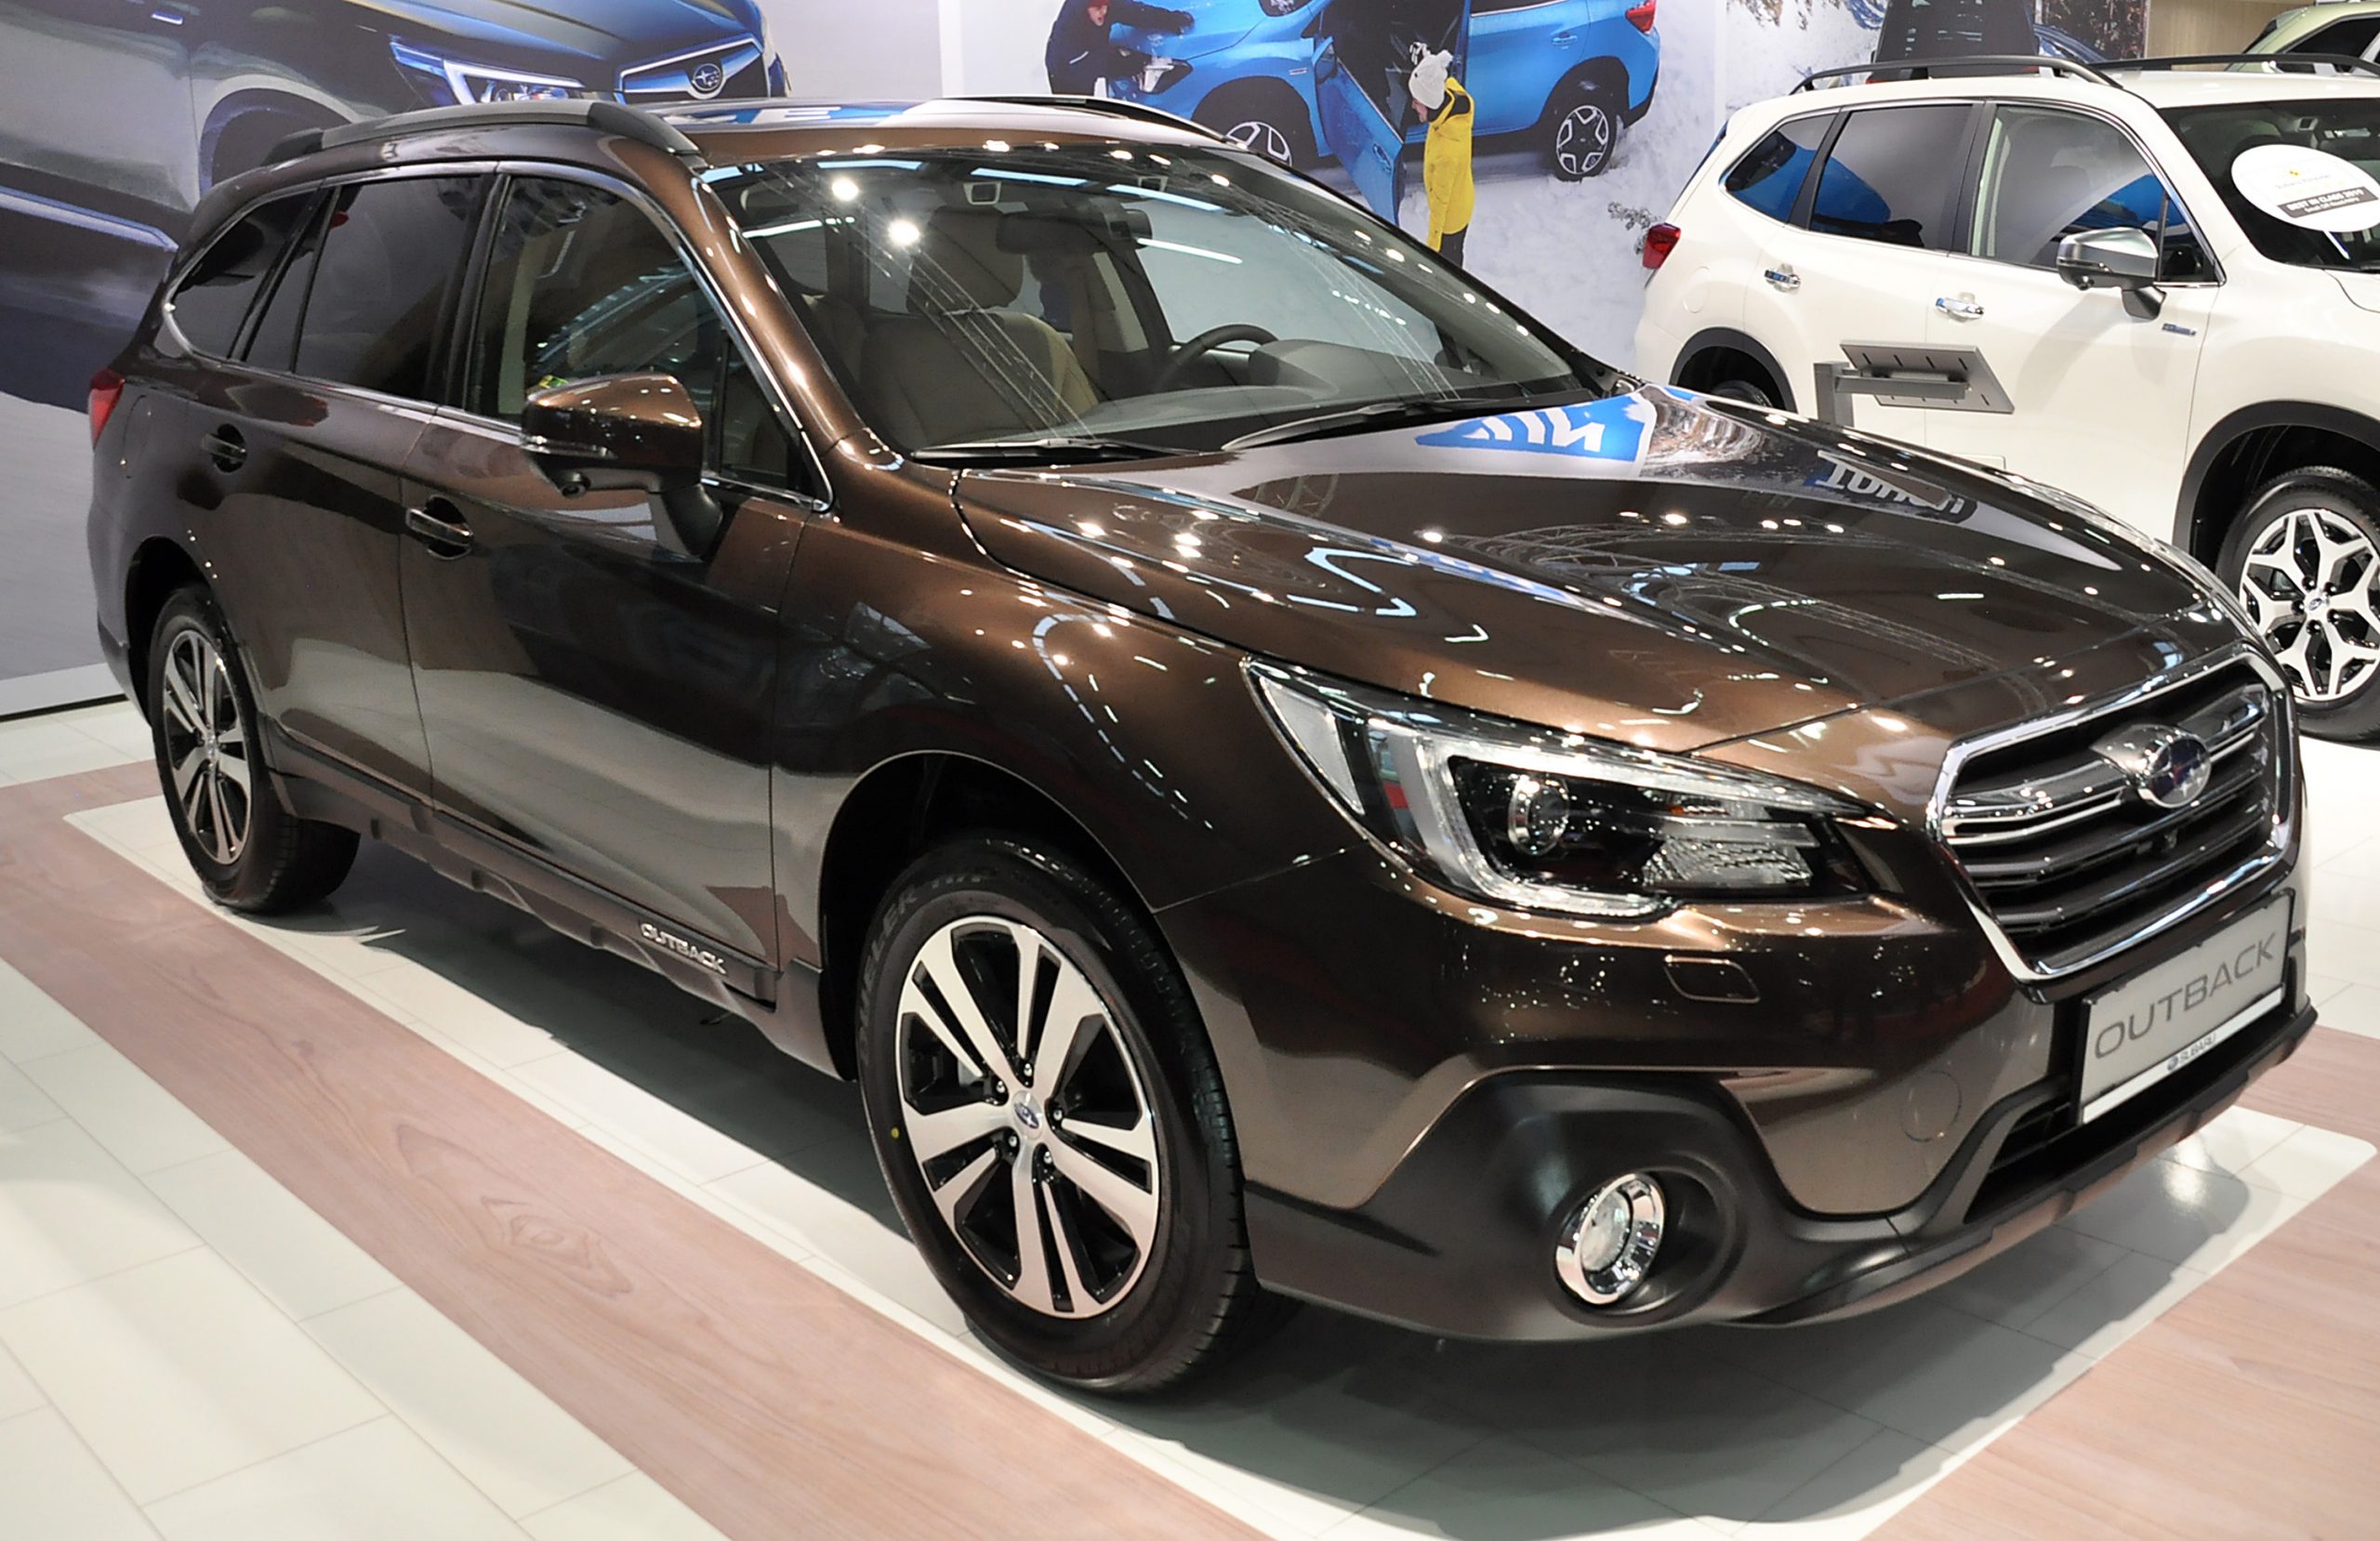 A brown Subaru Outback on display at an auto show